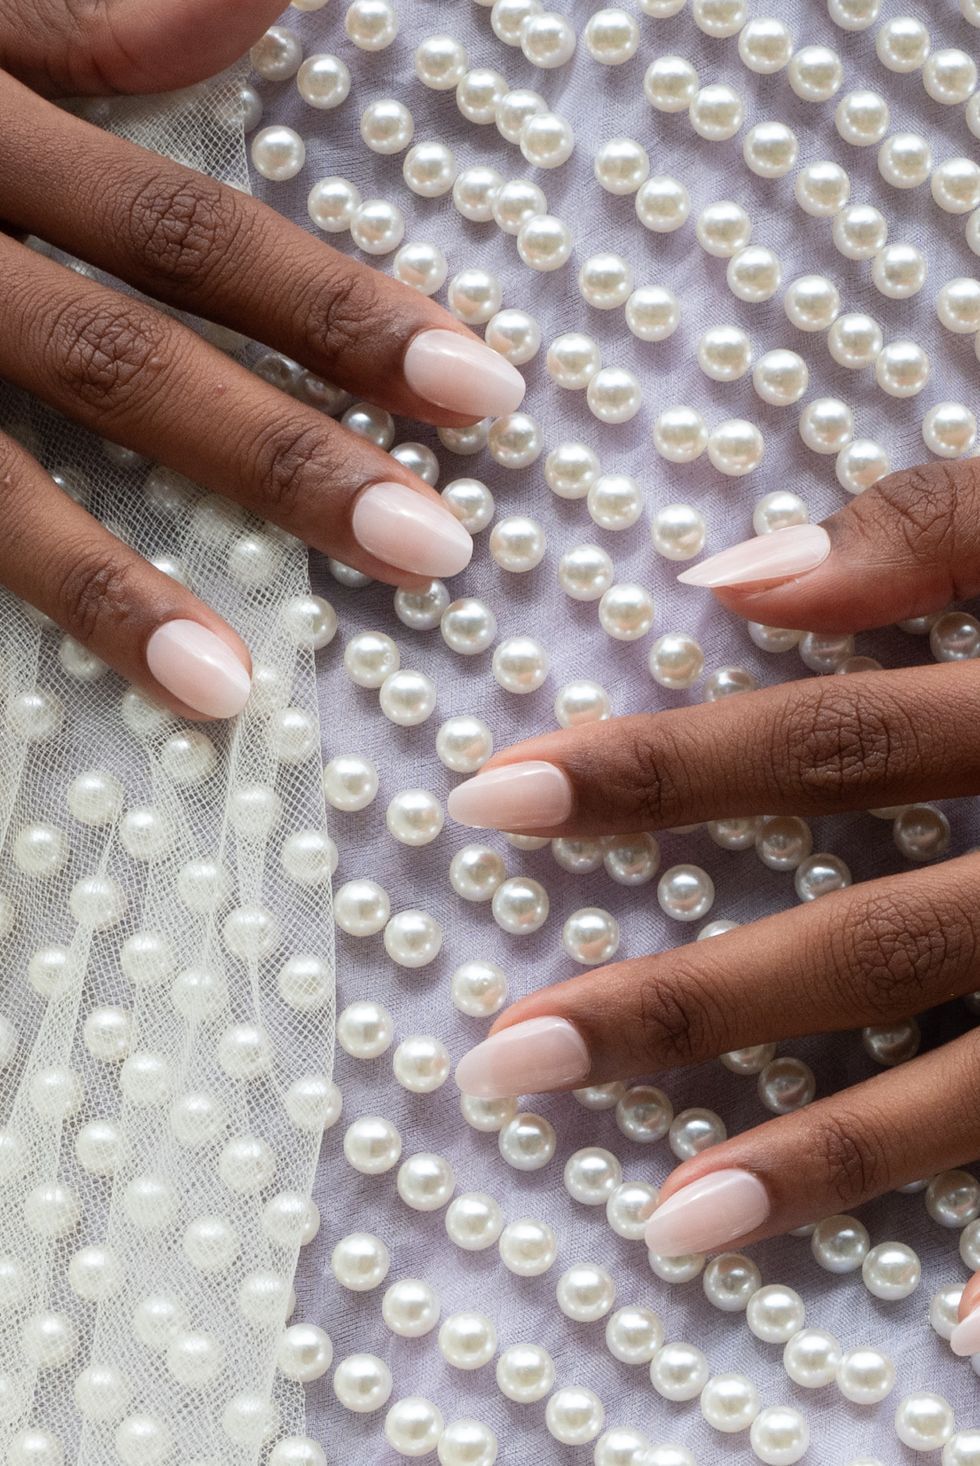 12 Top Nail Trends For 2023, According to Experts